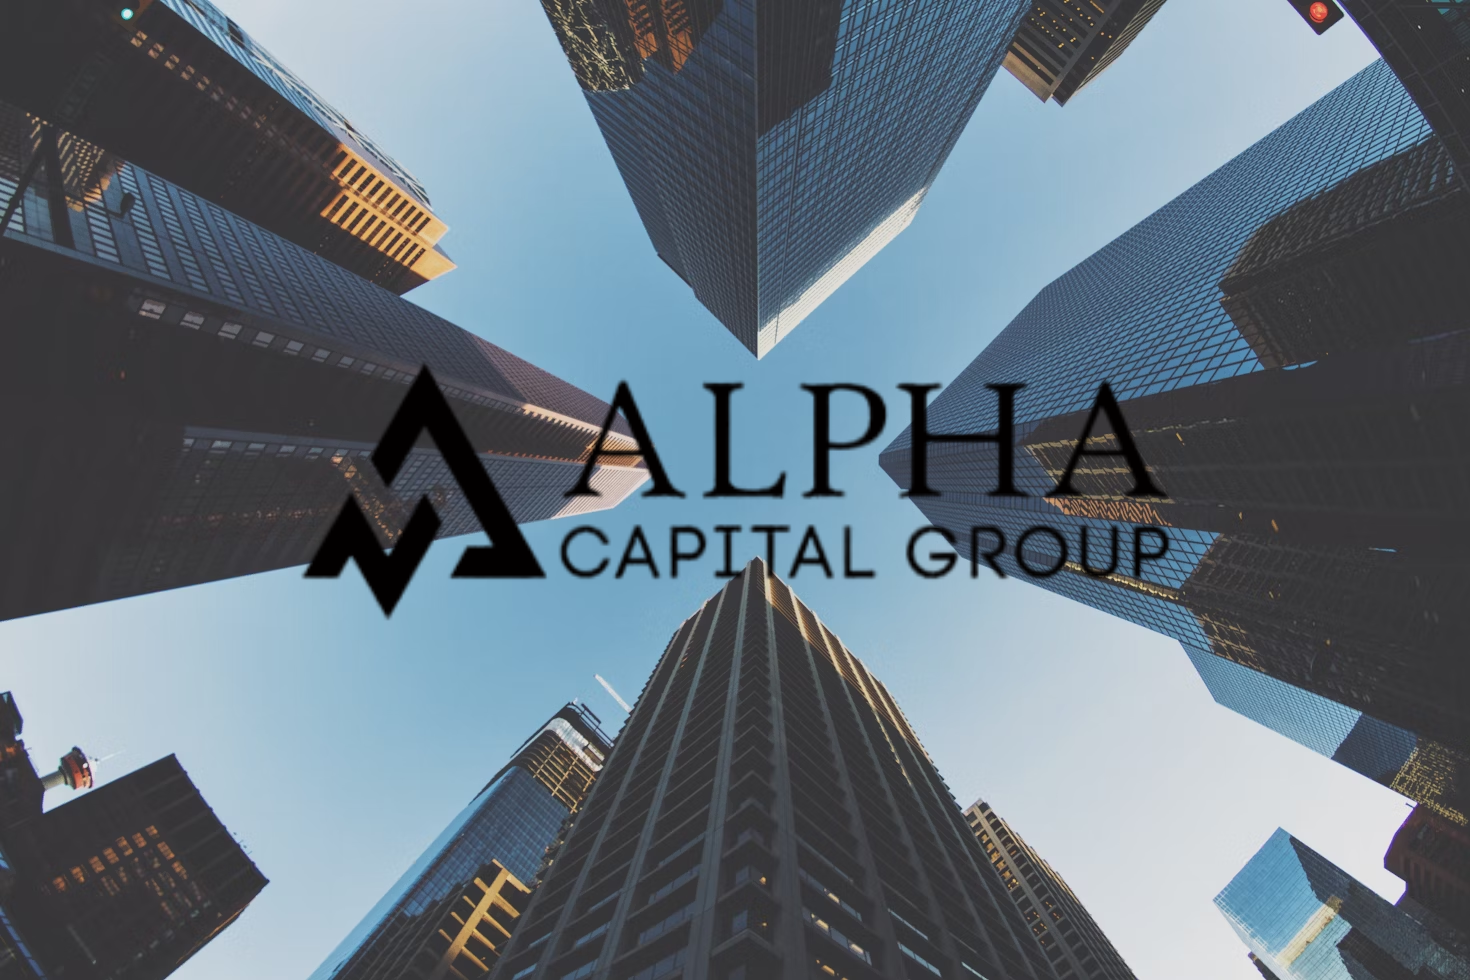 Alpha Capital Group plans to relaunch services for clients in the US in June after suspending purchases earlier this year due to regulatory concerns.